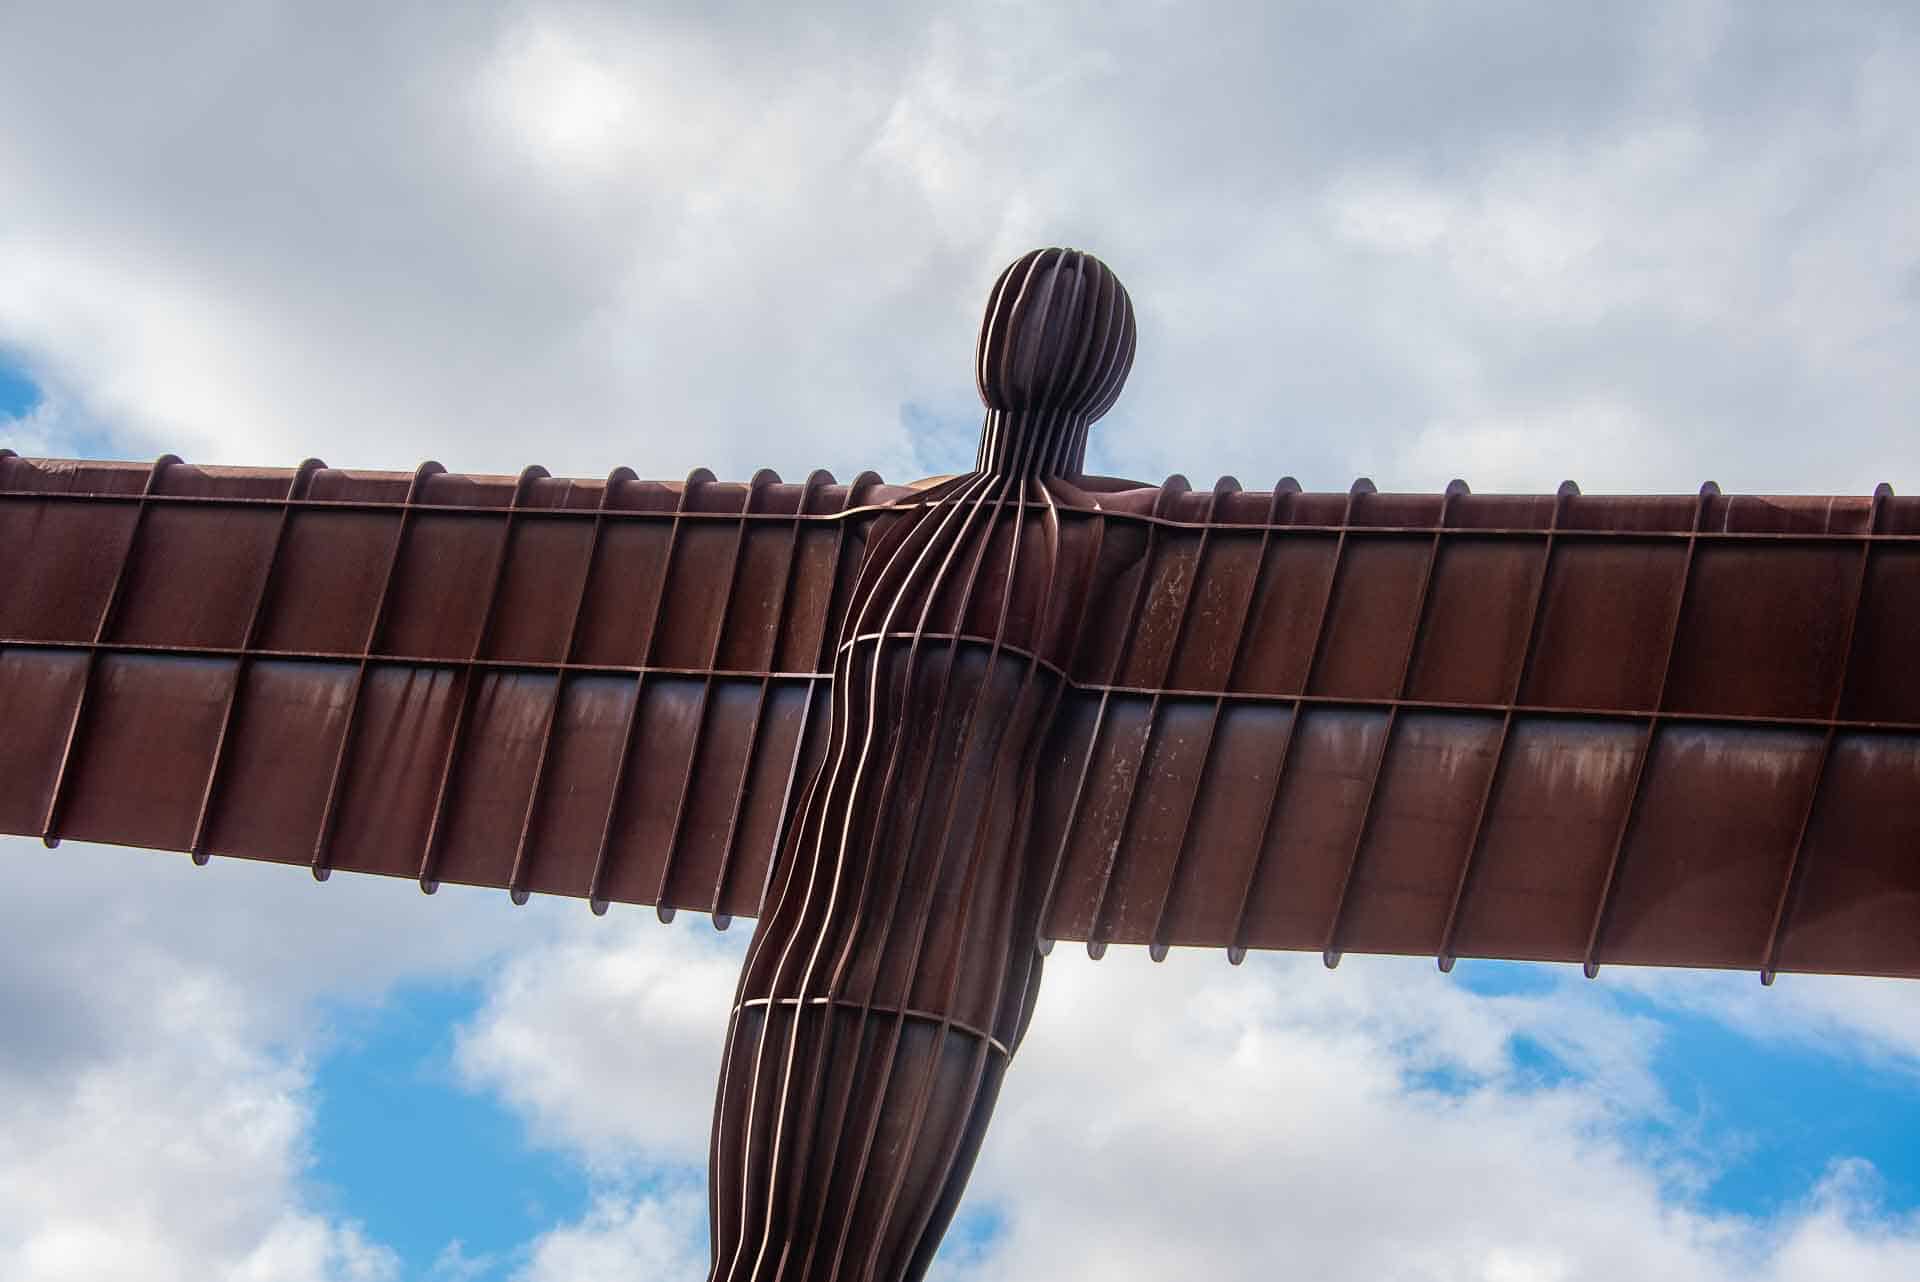 Close up view of The Angel of the North in Newcastle